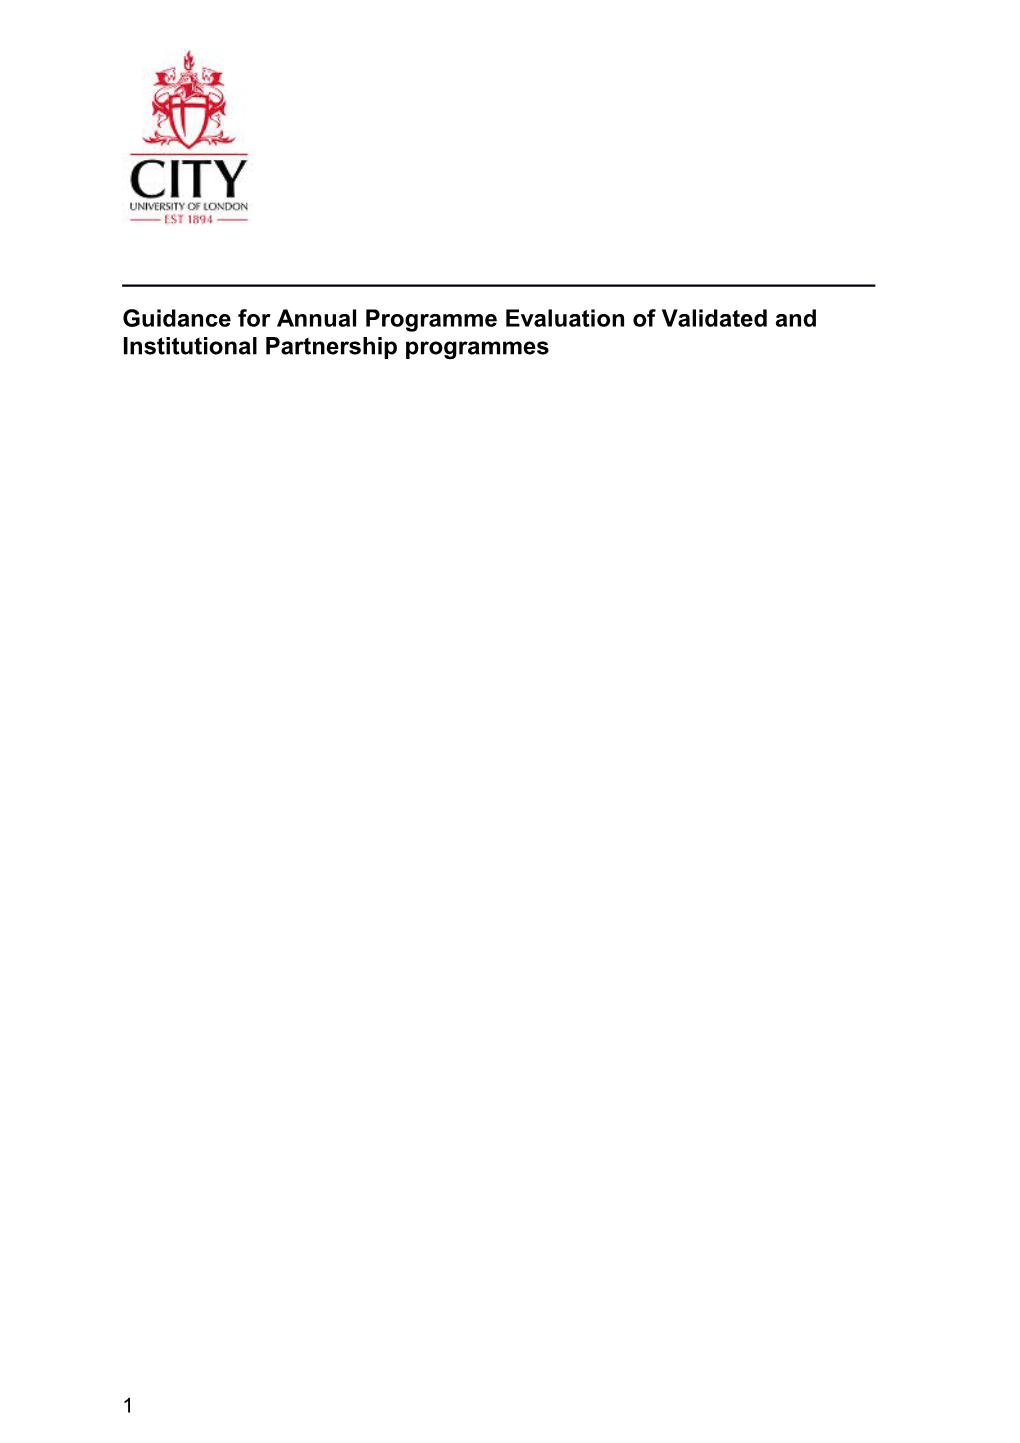 Guidance for Annual Programme Evaluation of Validated and Institutional Partnership Programmes